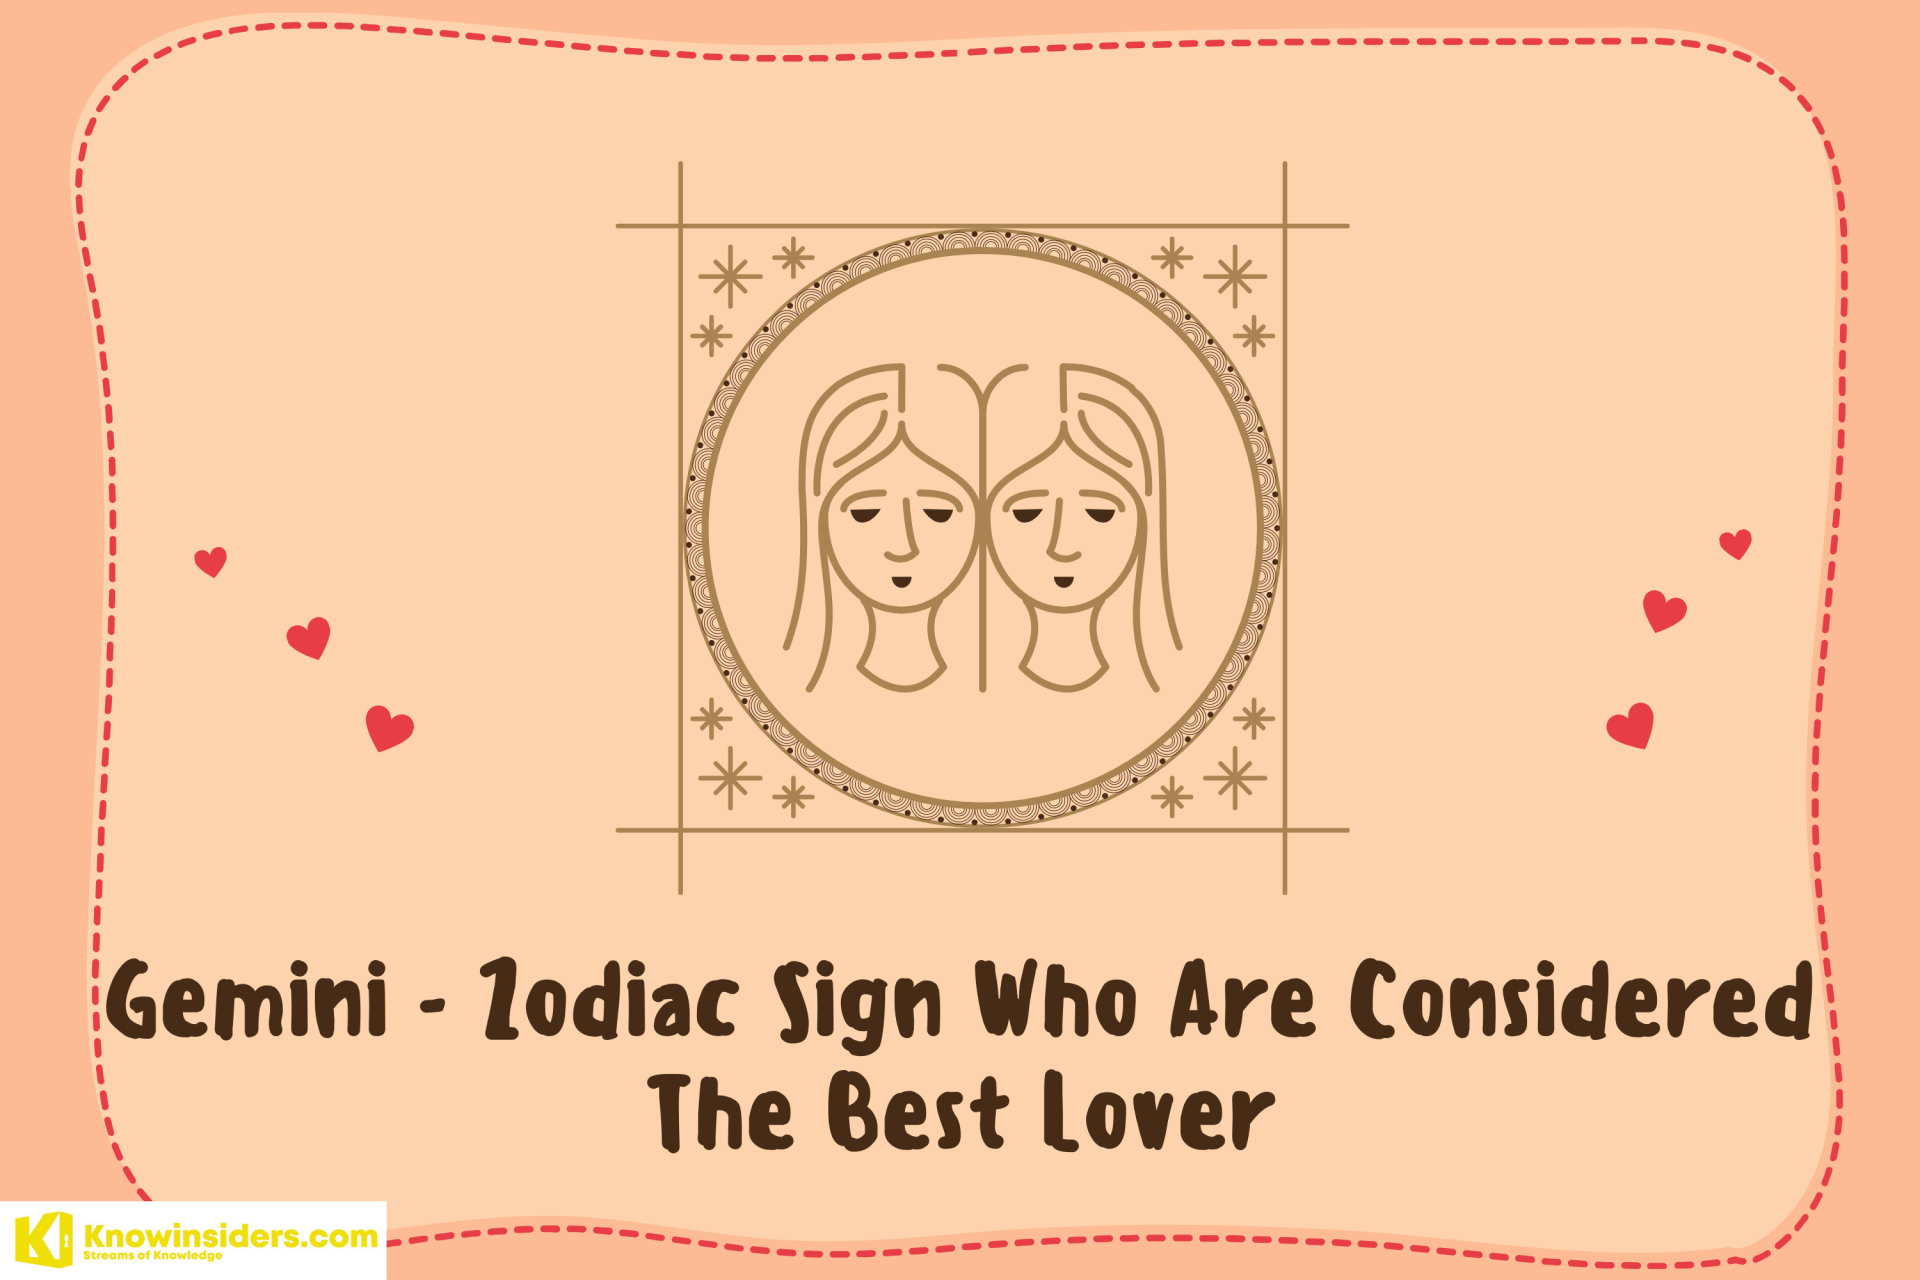 Love Monthly Horoscope May 2022: Astrological Prediction For 12 Zodiac Signs